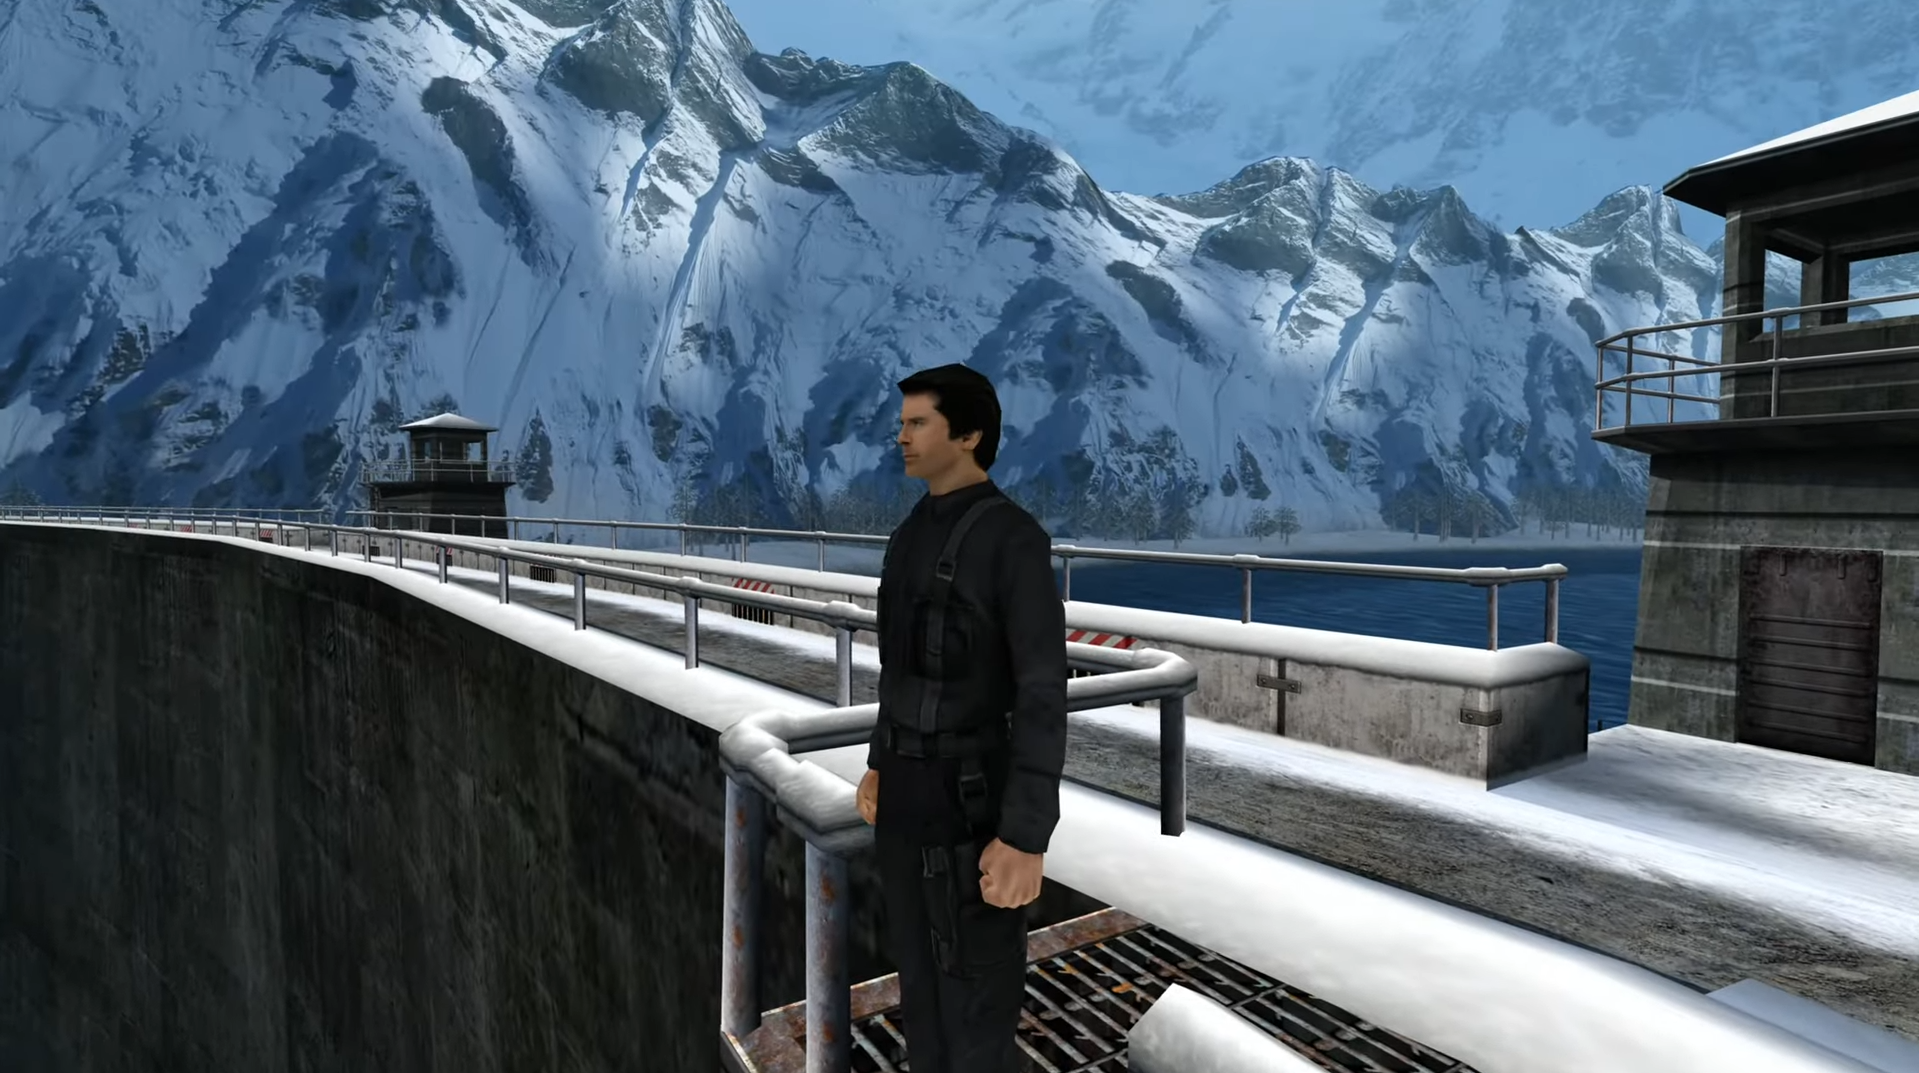 Goldeneye 007's lost Xbox 360 remaster has leaked—as a full-game